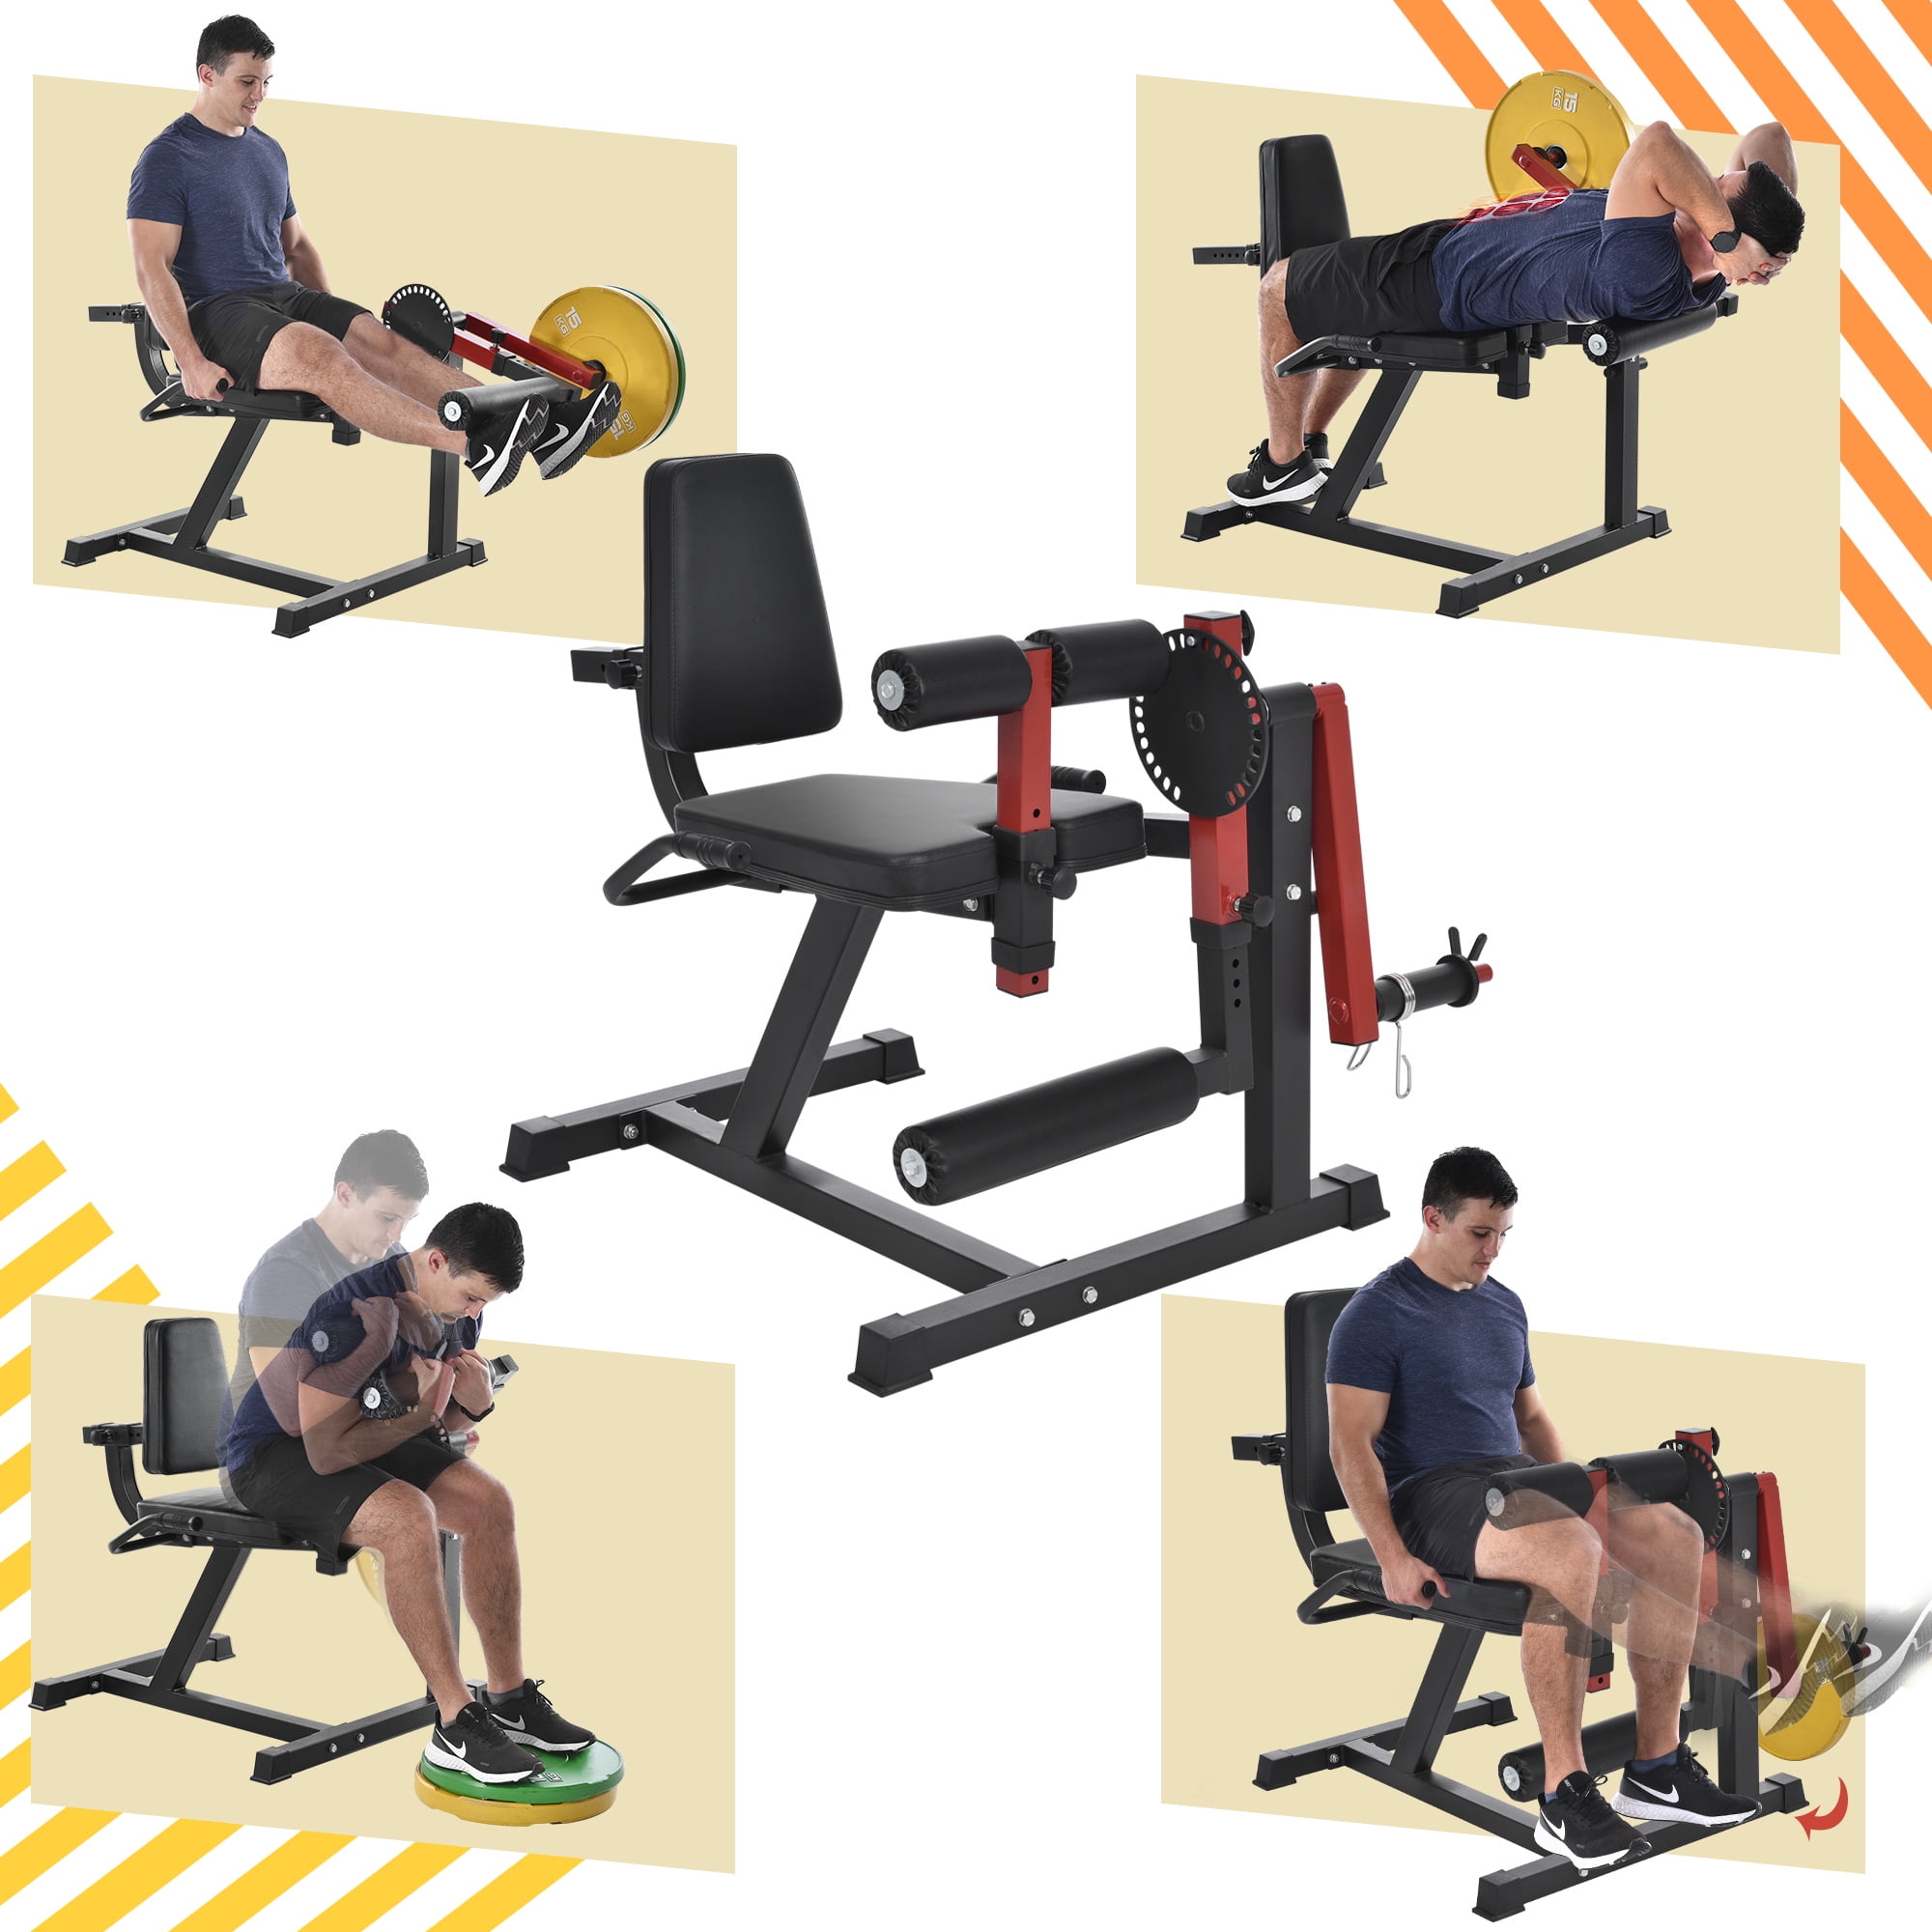 Seated Chair Leg Extensions – WorkoutLabs Exercise Guide